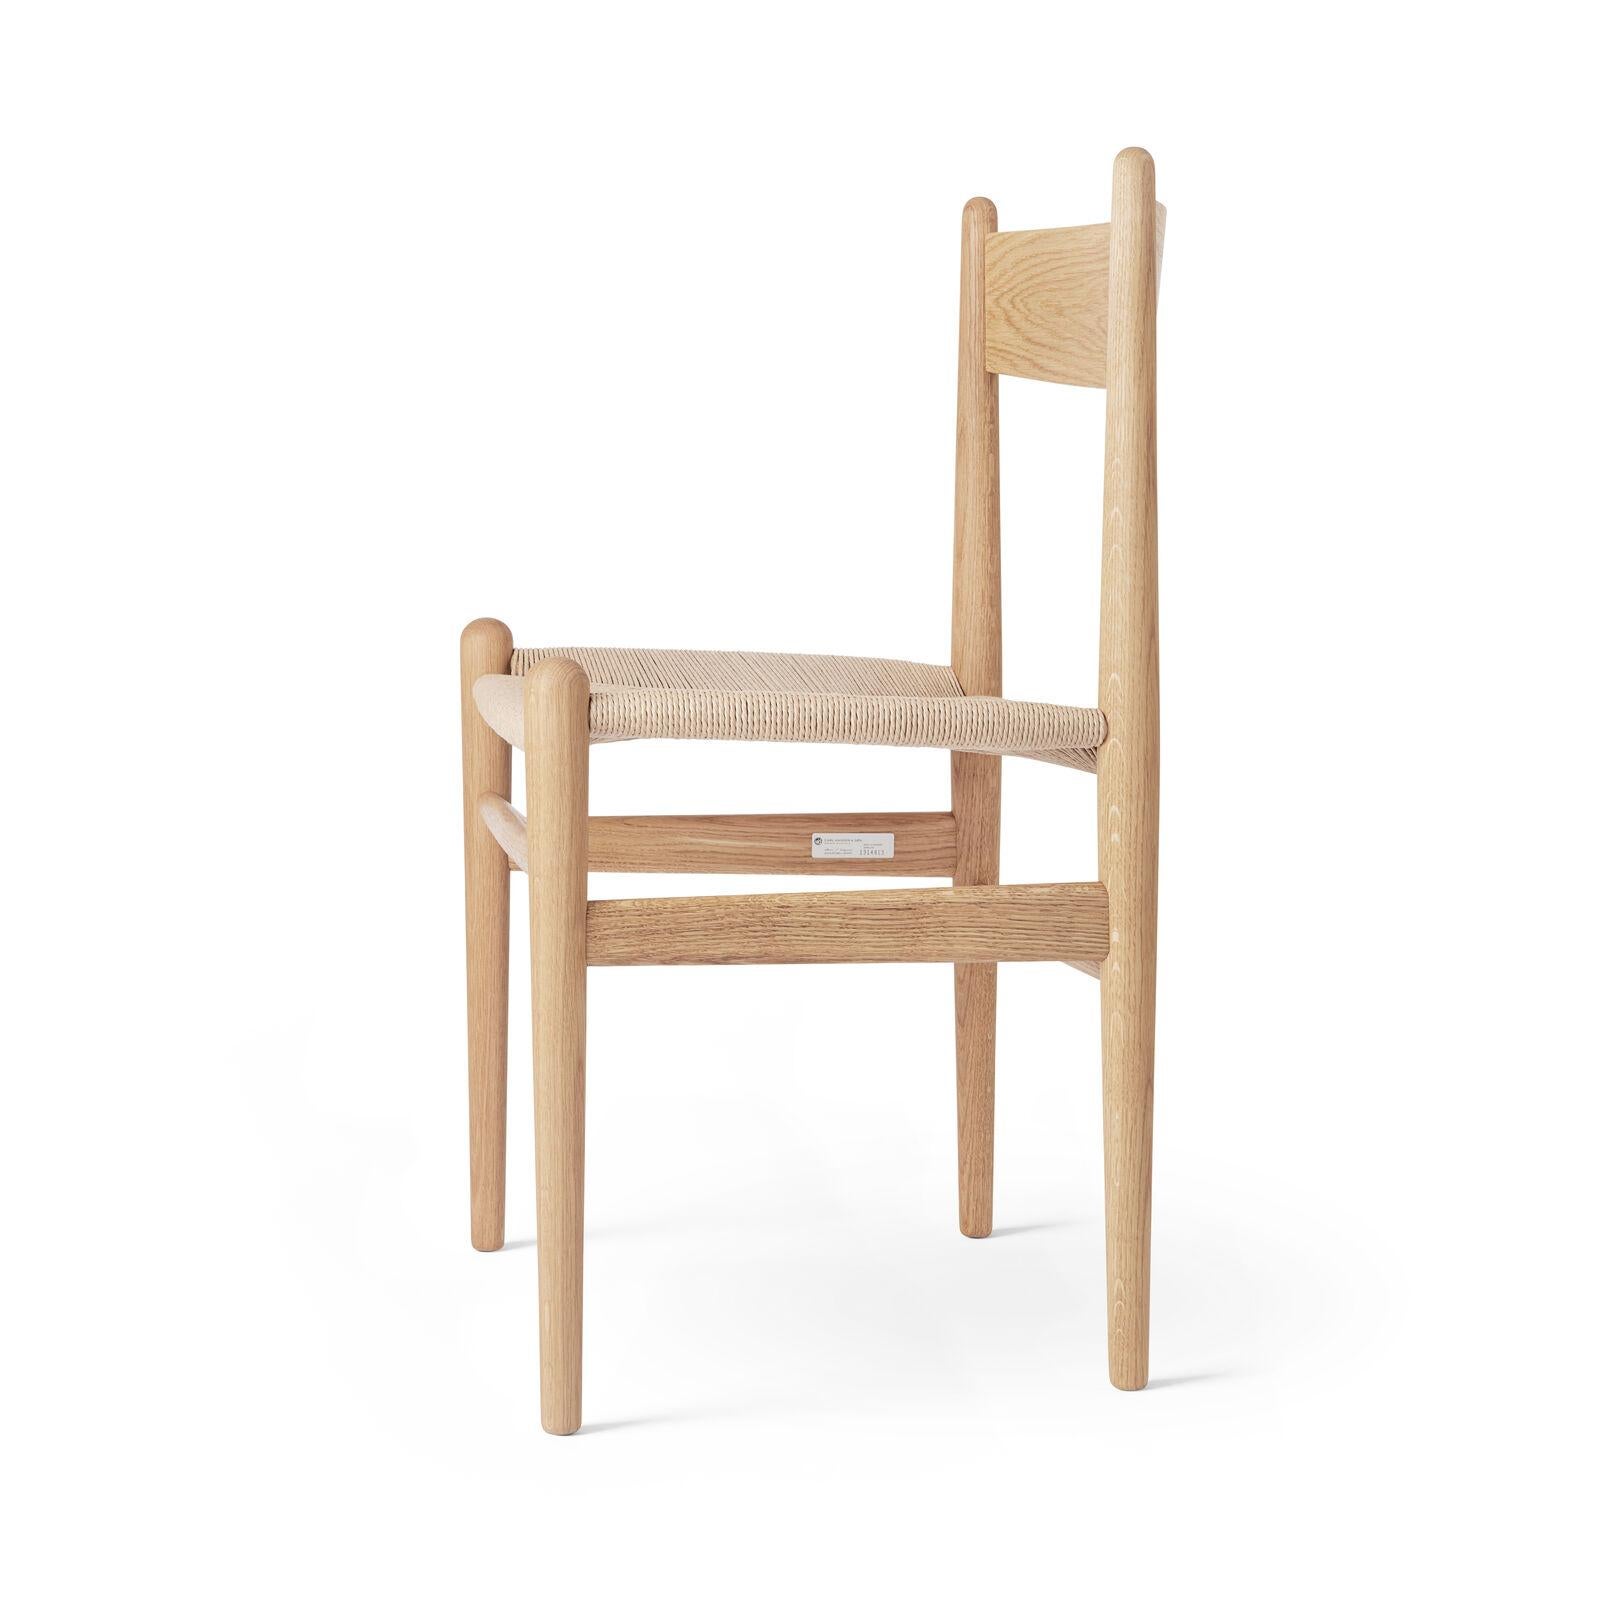 Craftsmanship and attention to detail are clear to see in Hans J. Wegner’s CH36 dining chair. The clean and simple 1962 chair is as comfortable to sit in as it is beautiful to behold.